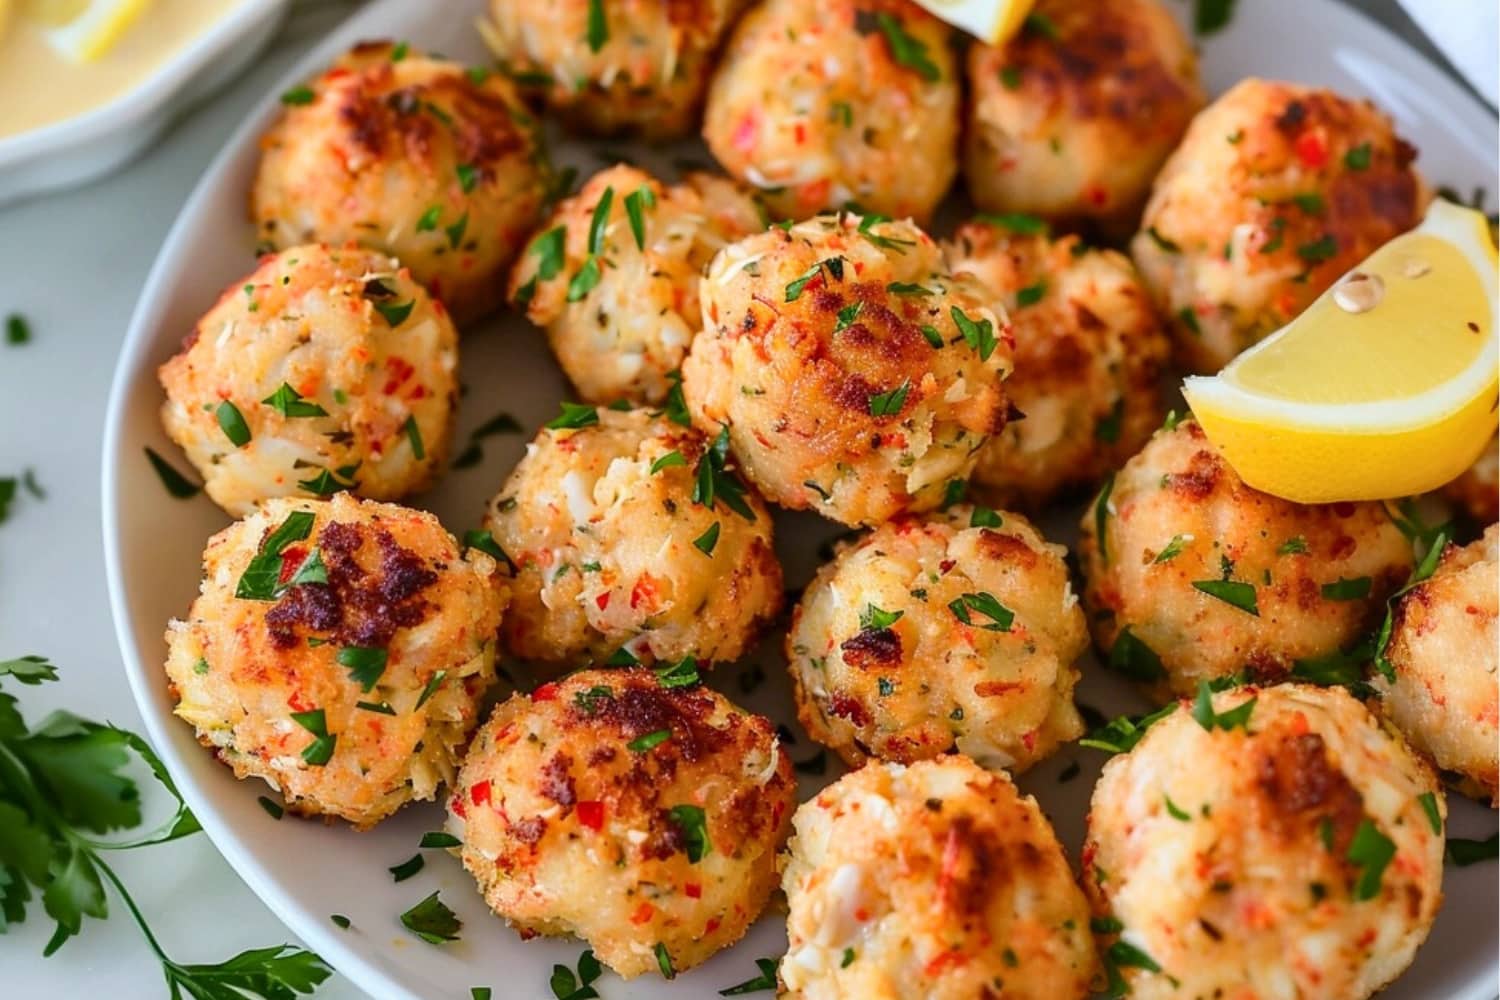 Crab balls garnished with chopped parsley served in white plate.